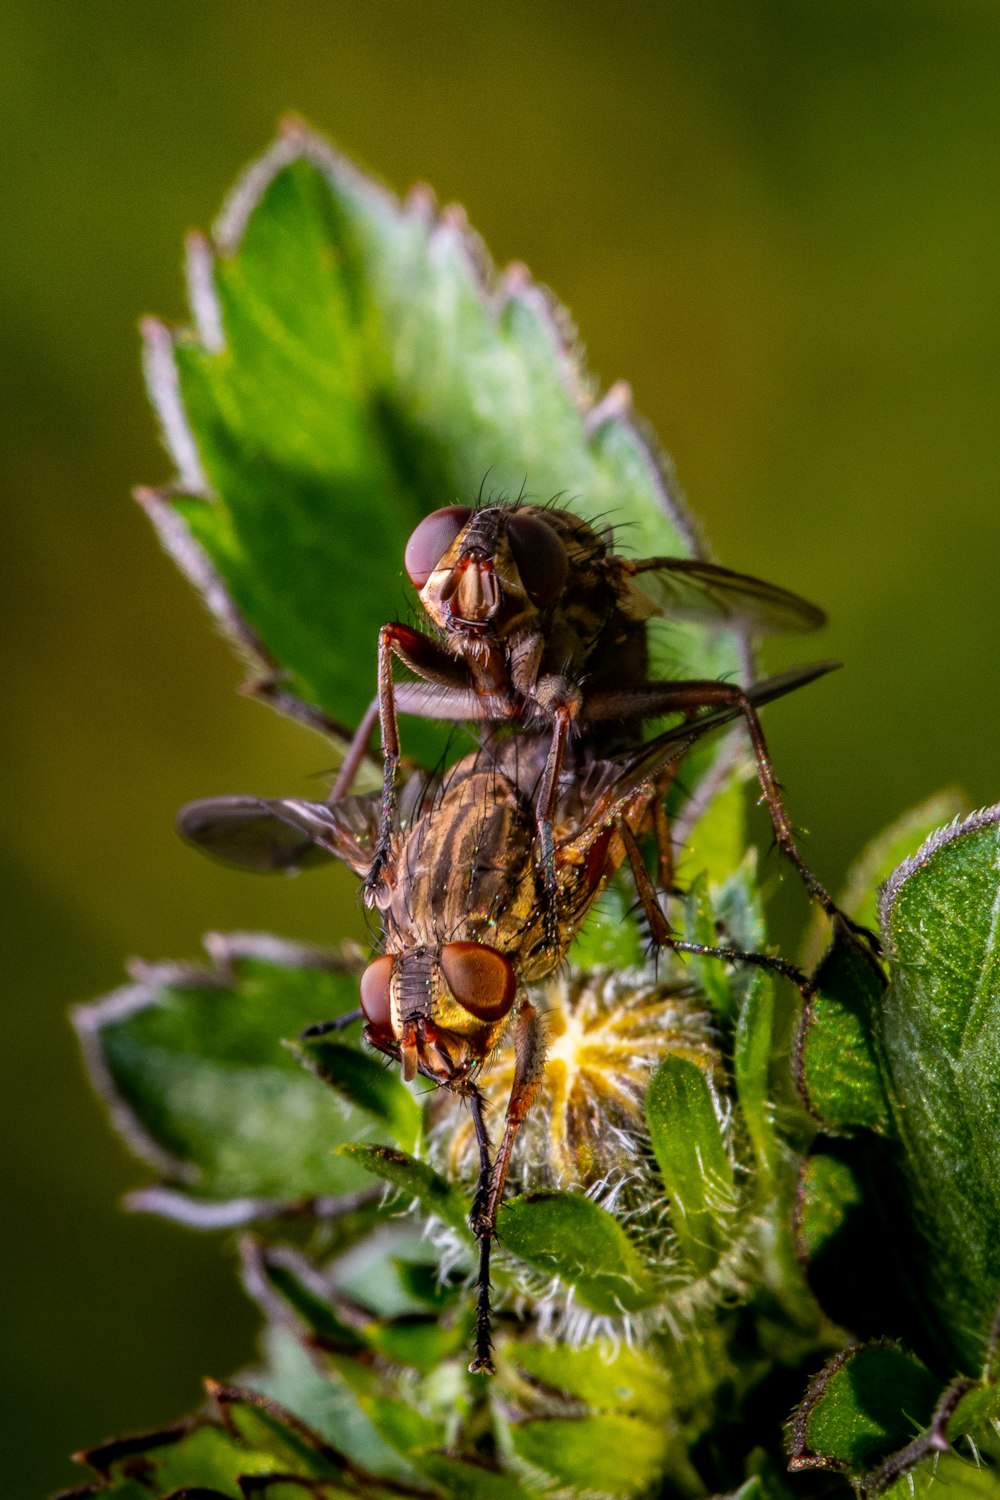 black and yellow fly perched on green leaf in close up photography during daytime